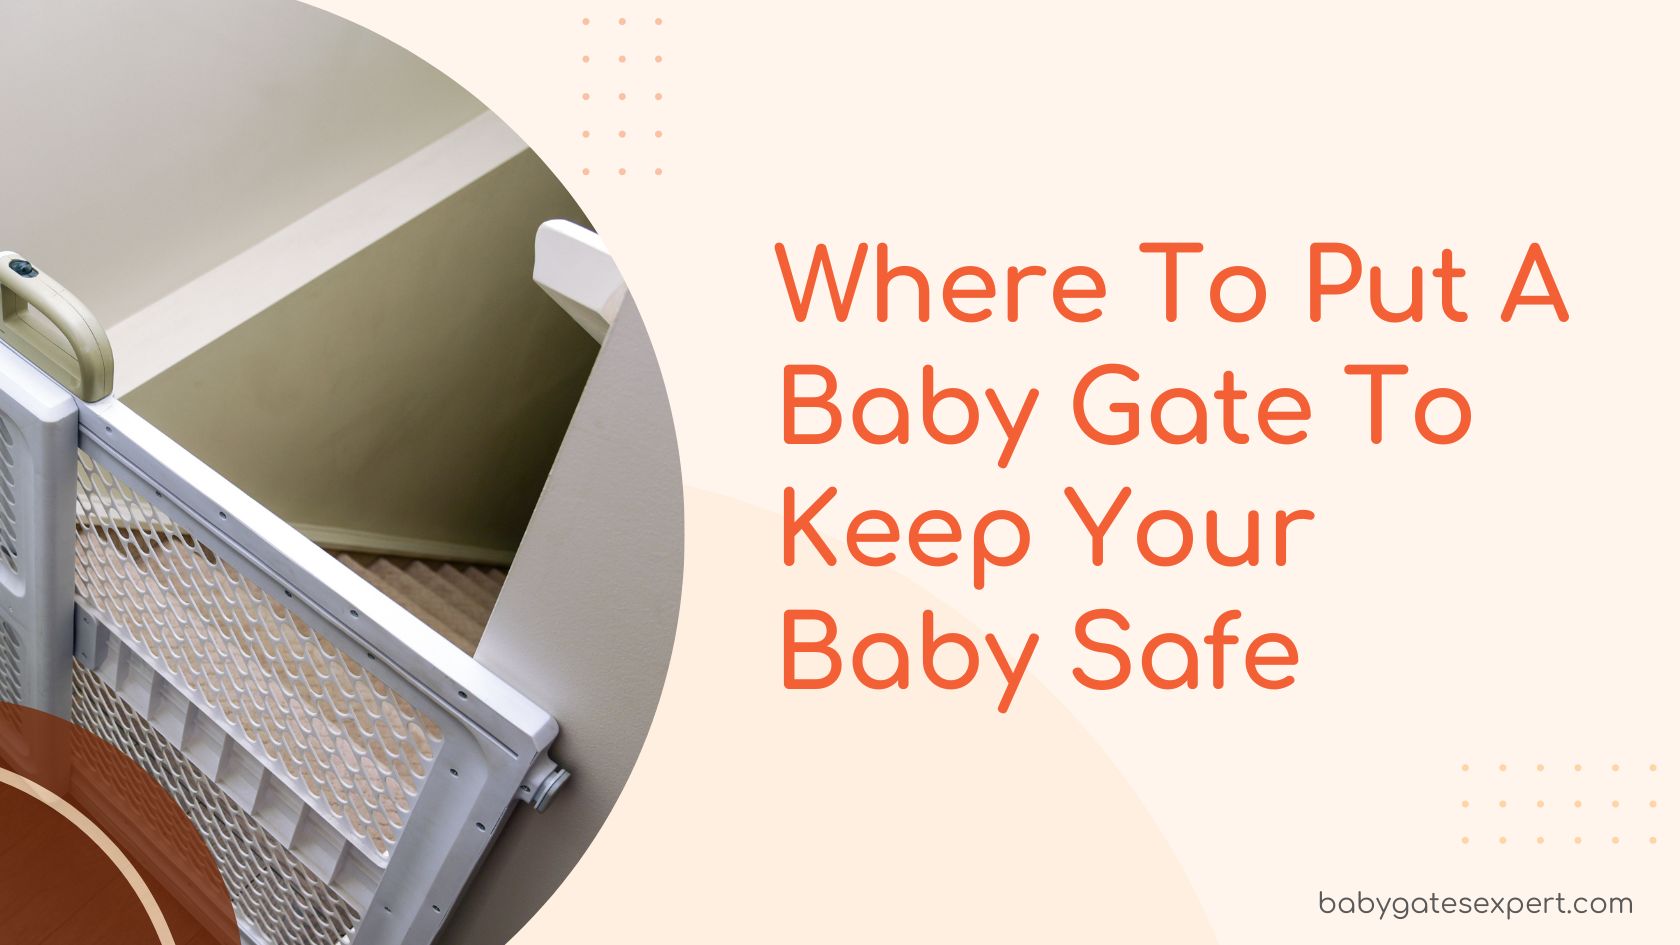 Where To Put A Baby Gate To Keep Your Baby Safe